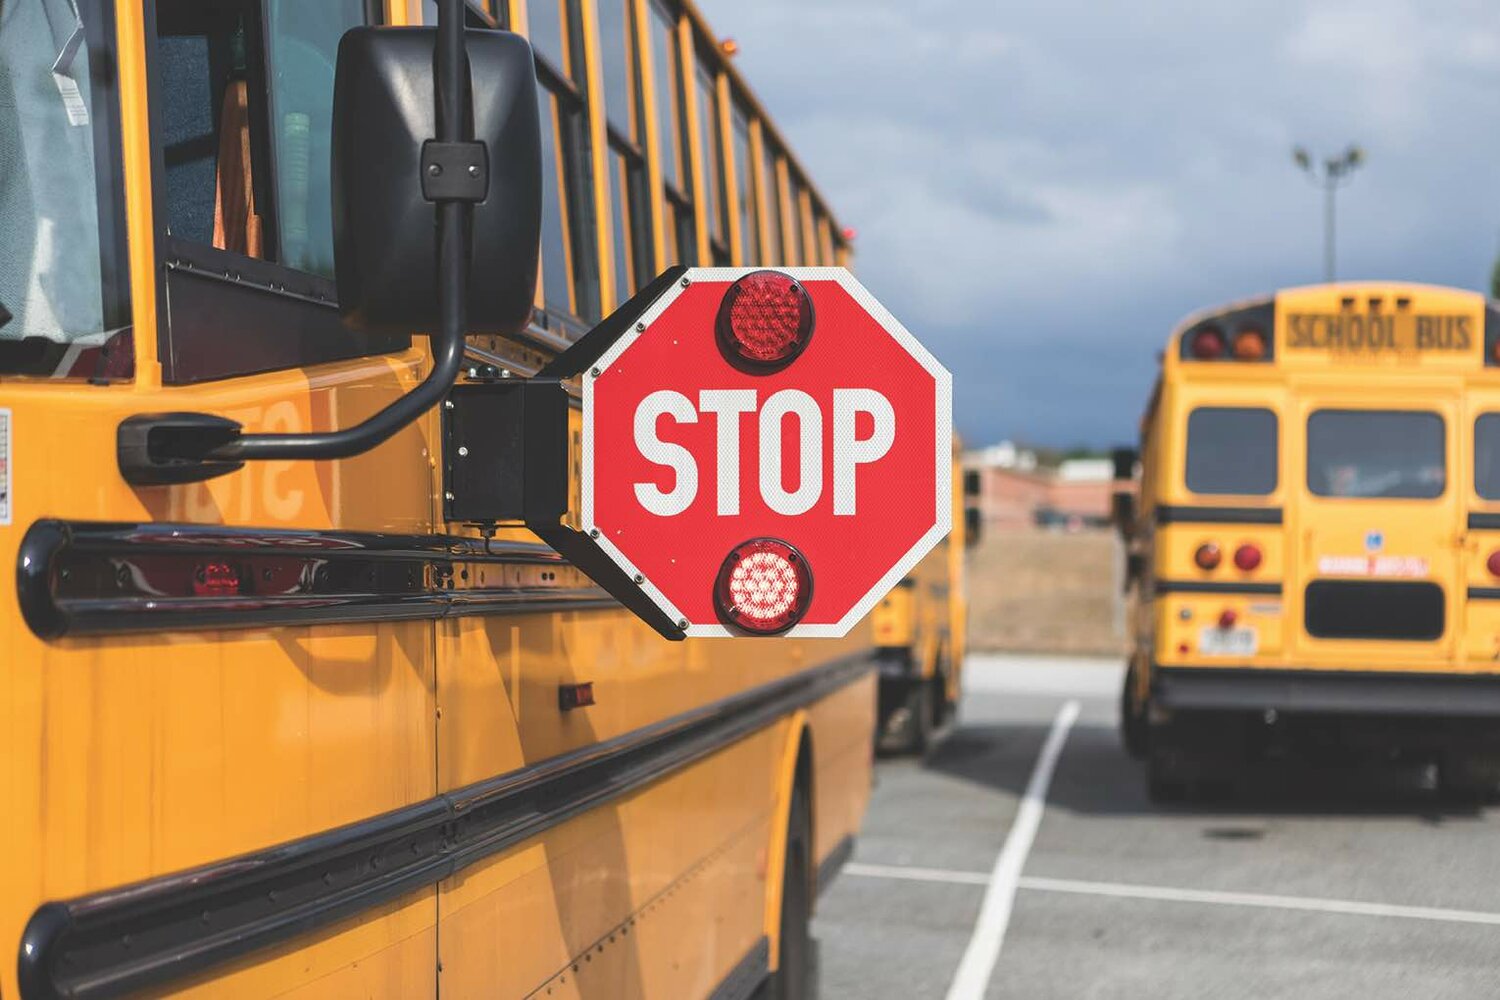 Suffolk County’s School Bus Stop-Arm Safety Program equips school buses with stop-arm cameras to capture evidence of illegal bus crossings.